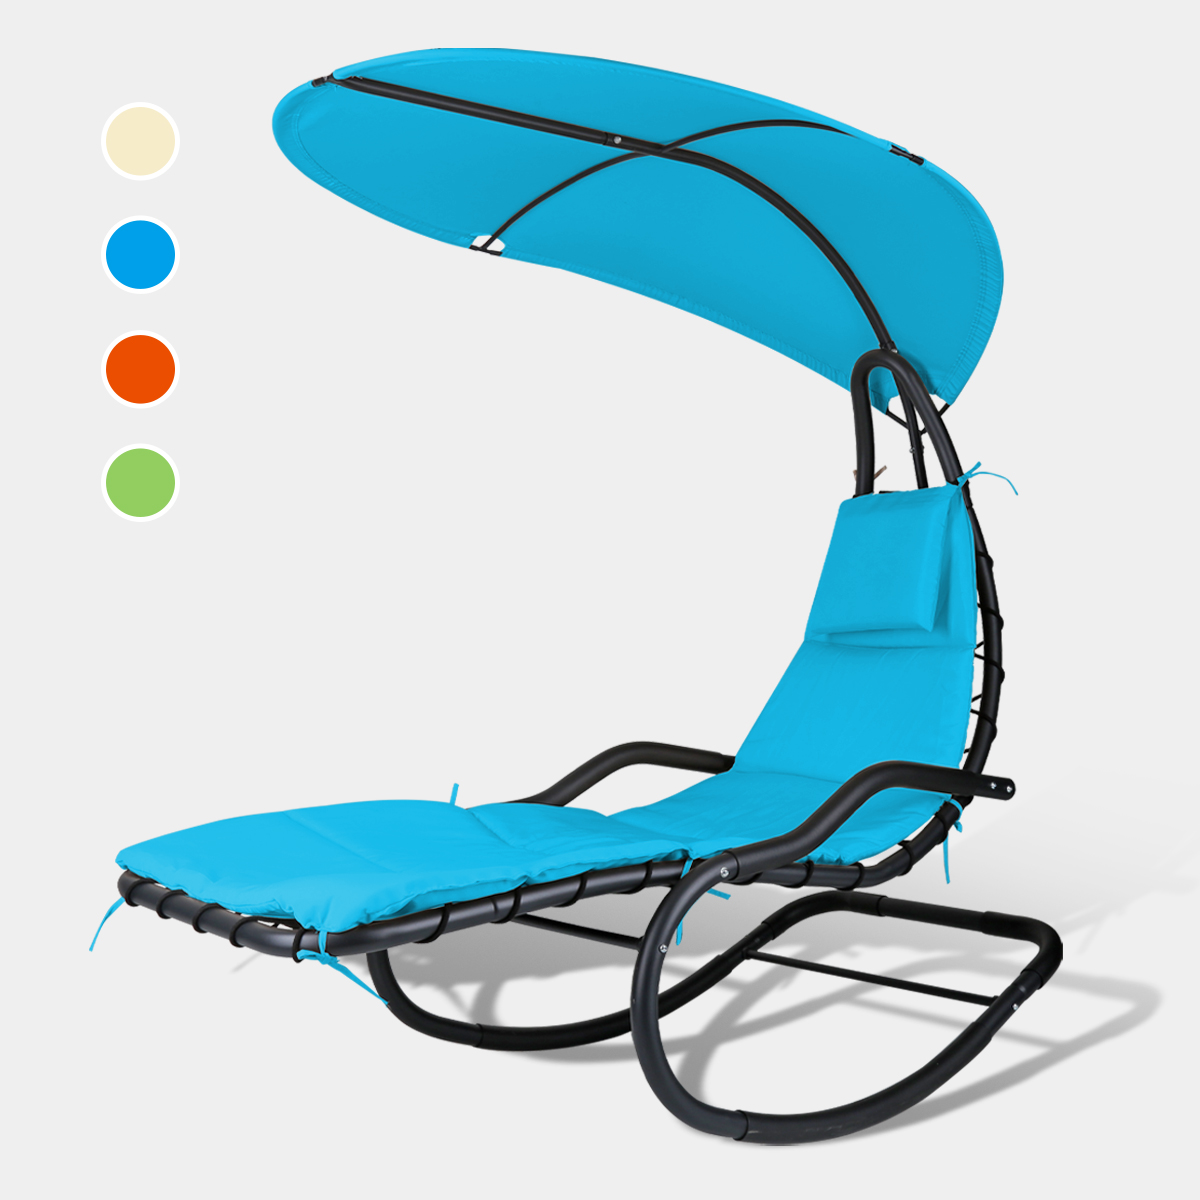 Rocking Hanging Lounge Chair - Curved Chaise Rocking Lounge Chair Swing For Backyard Patio w/ Built-in Pillow Removable Canopy with stand {Blue} - image 3 of 8